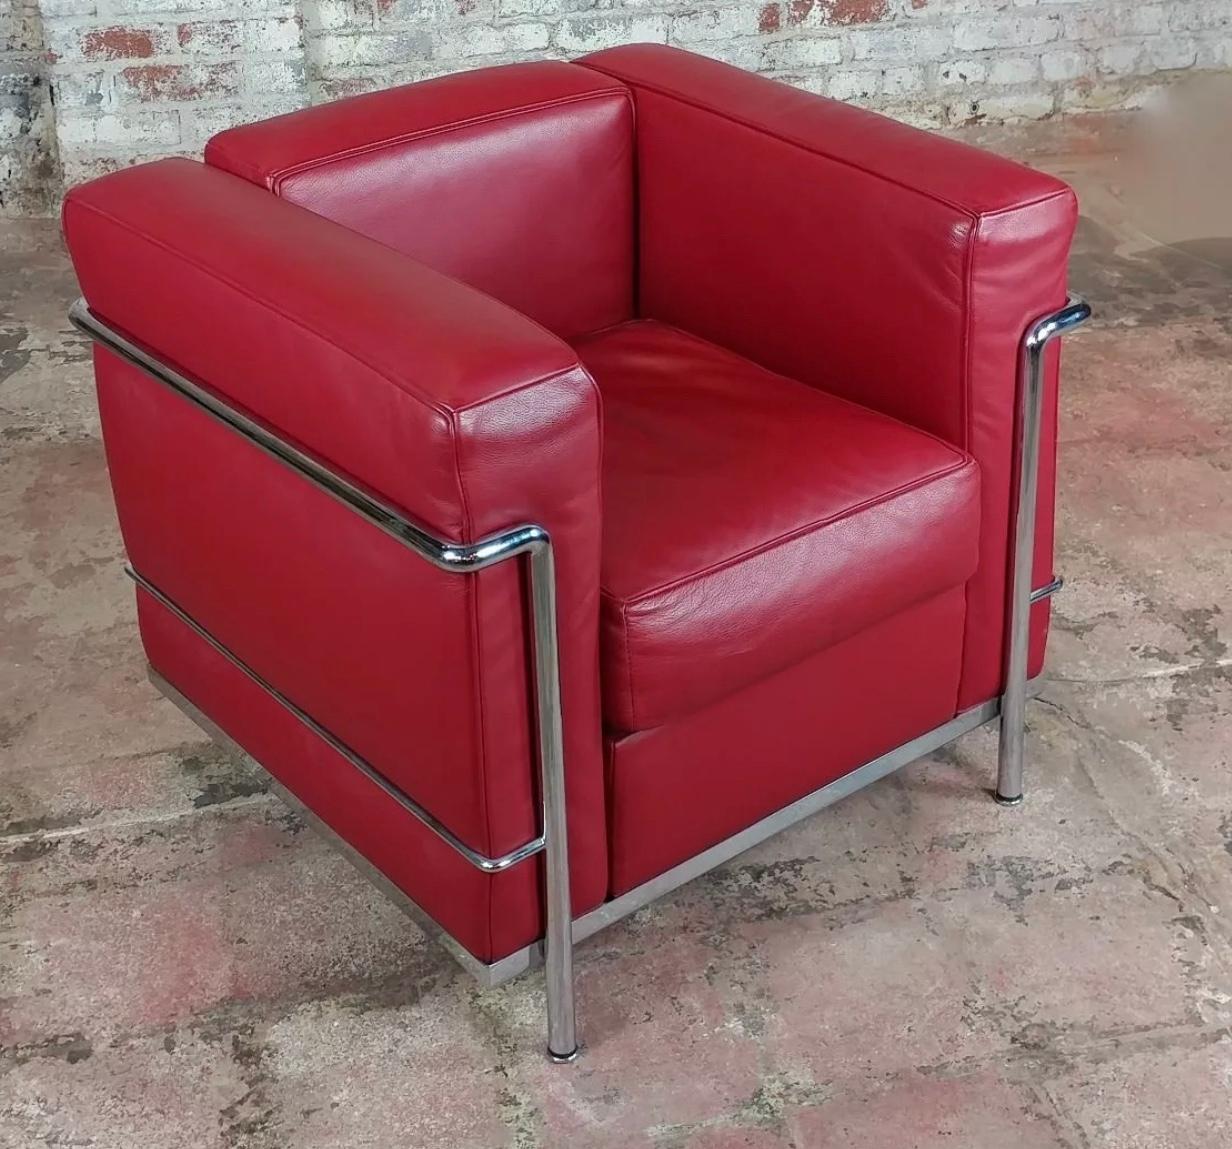 This LC2 armchair in blood red leather was designed by Le Corbusier/ Pierre Jeanneret/ Charlotte Perriand and produced by Cassina. It features the classic chrome steel frame.


Measures: H 26.38 in. x W 29.93 in. x D 27.56 in.
SH